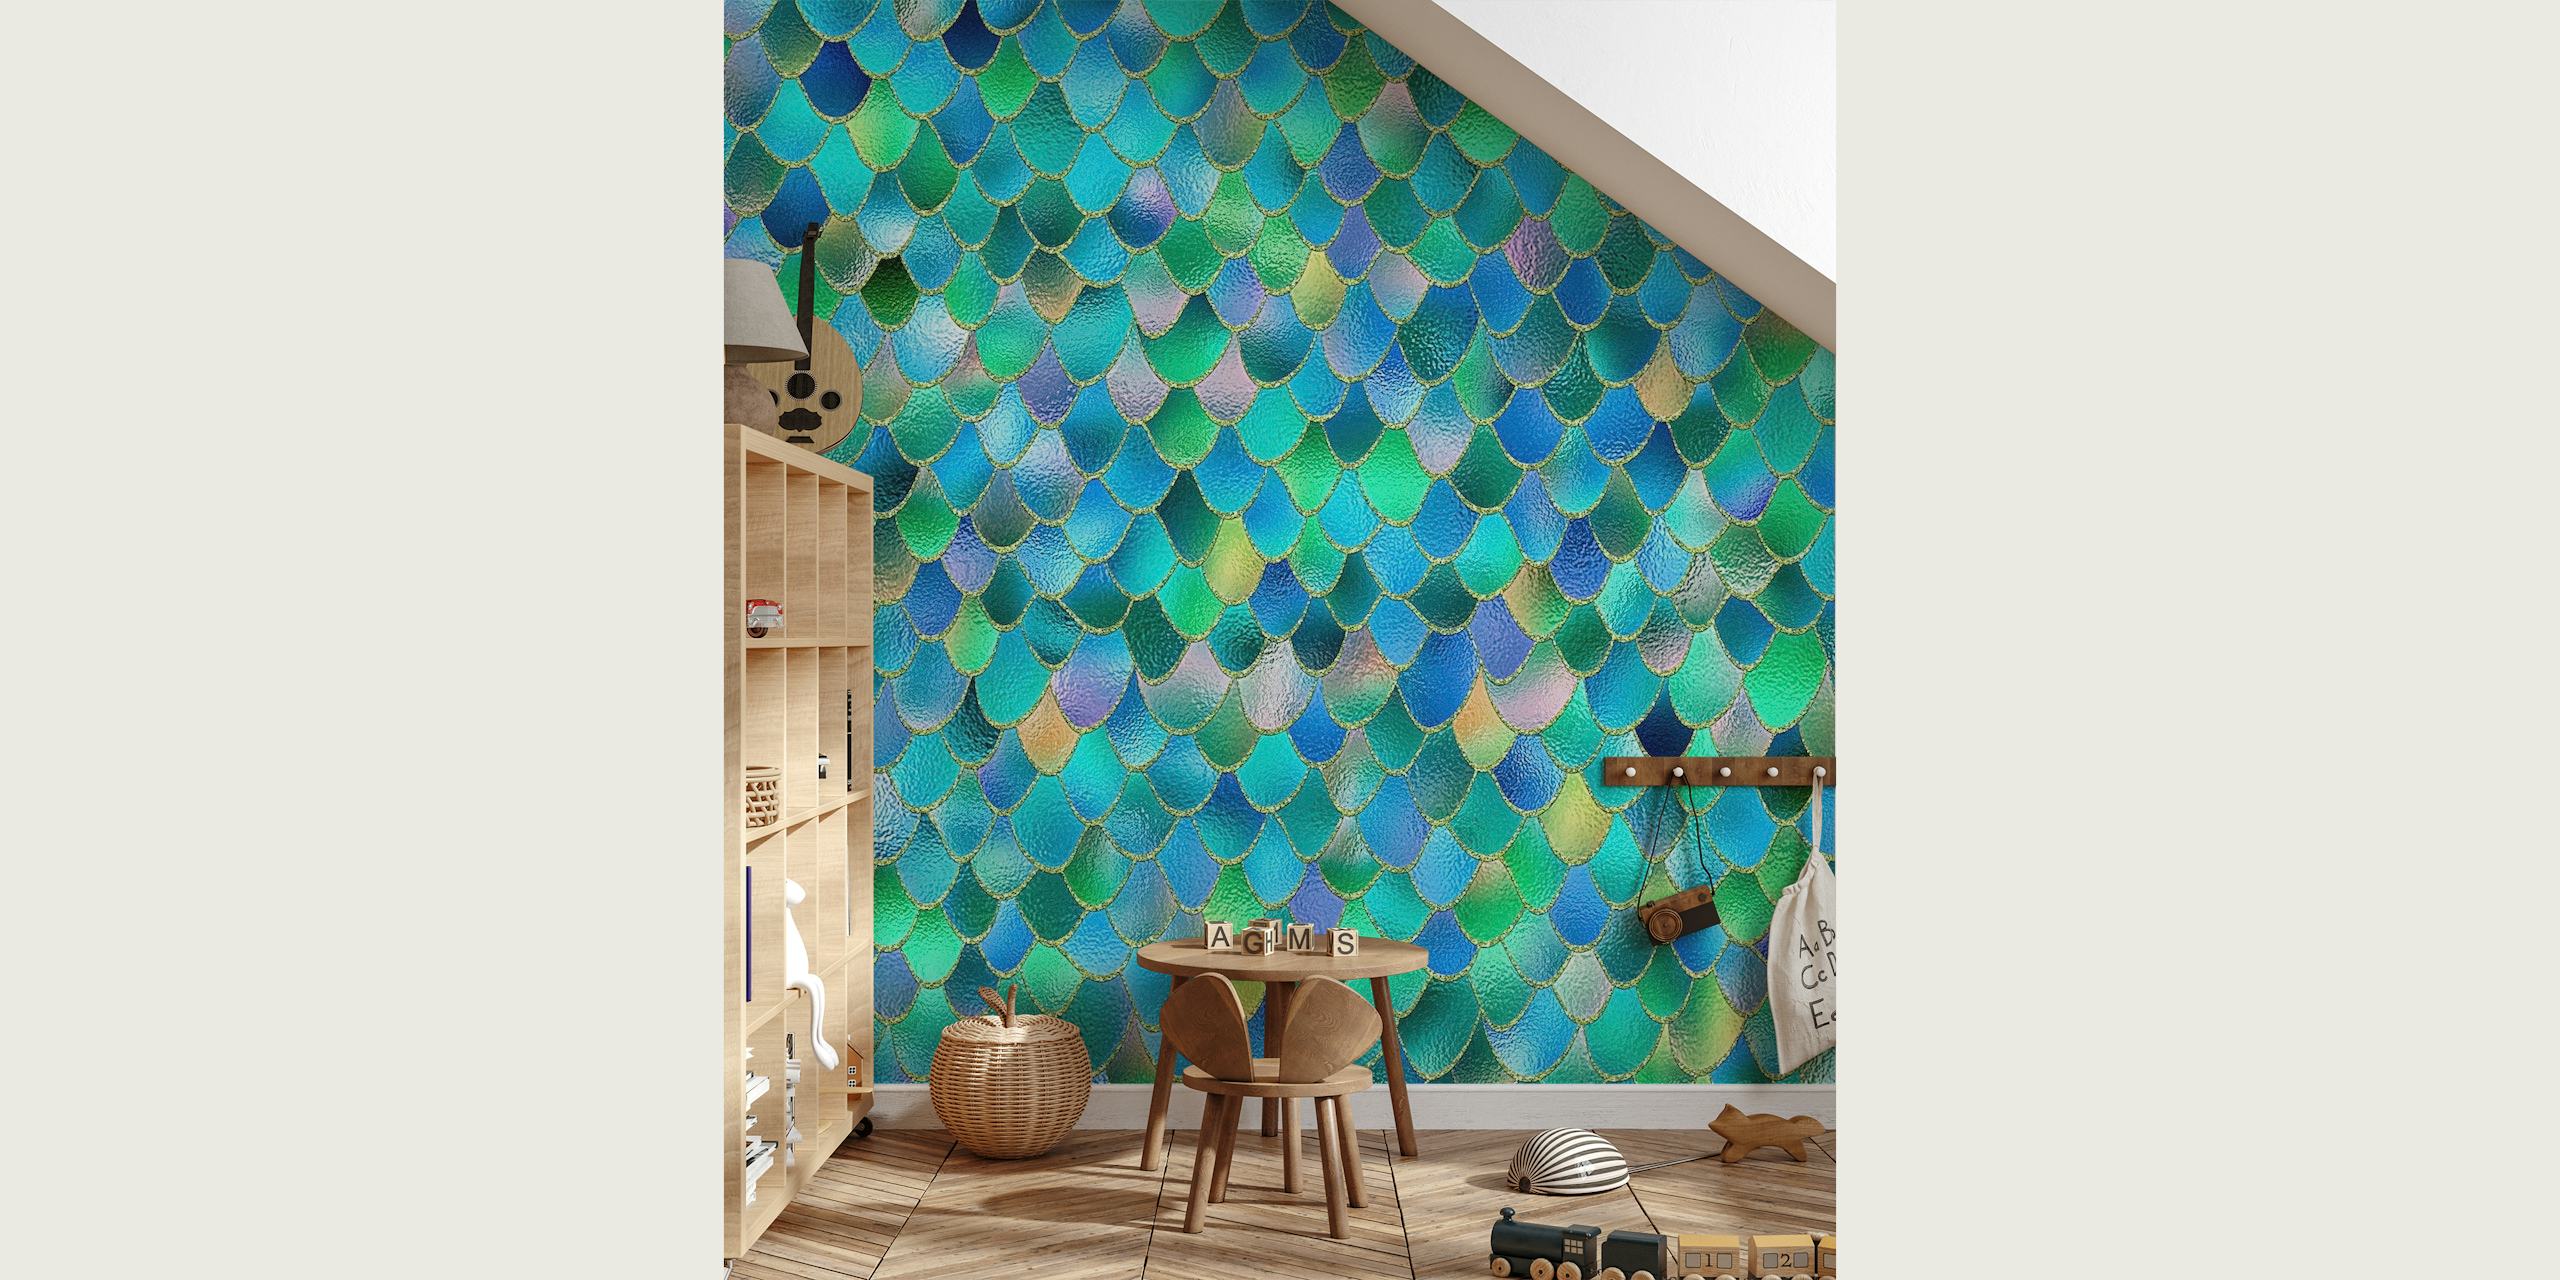 Ocean-inspired girly mermaid scales wall mural with blue, teal, and green hues